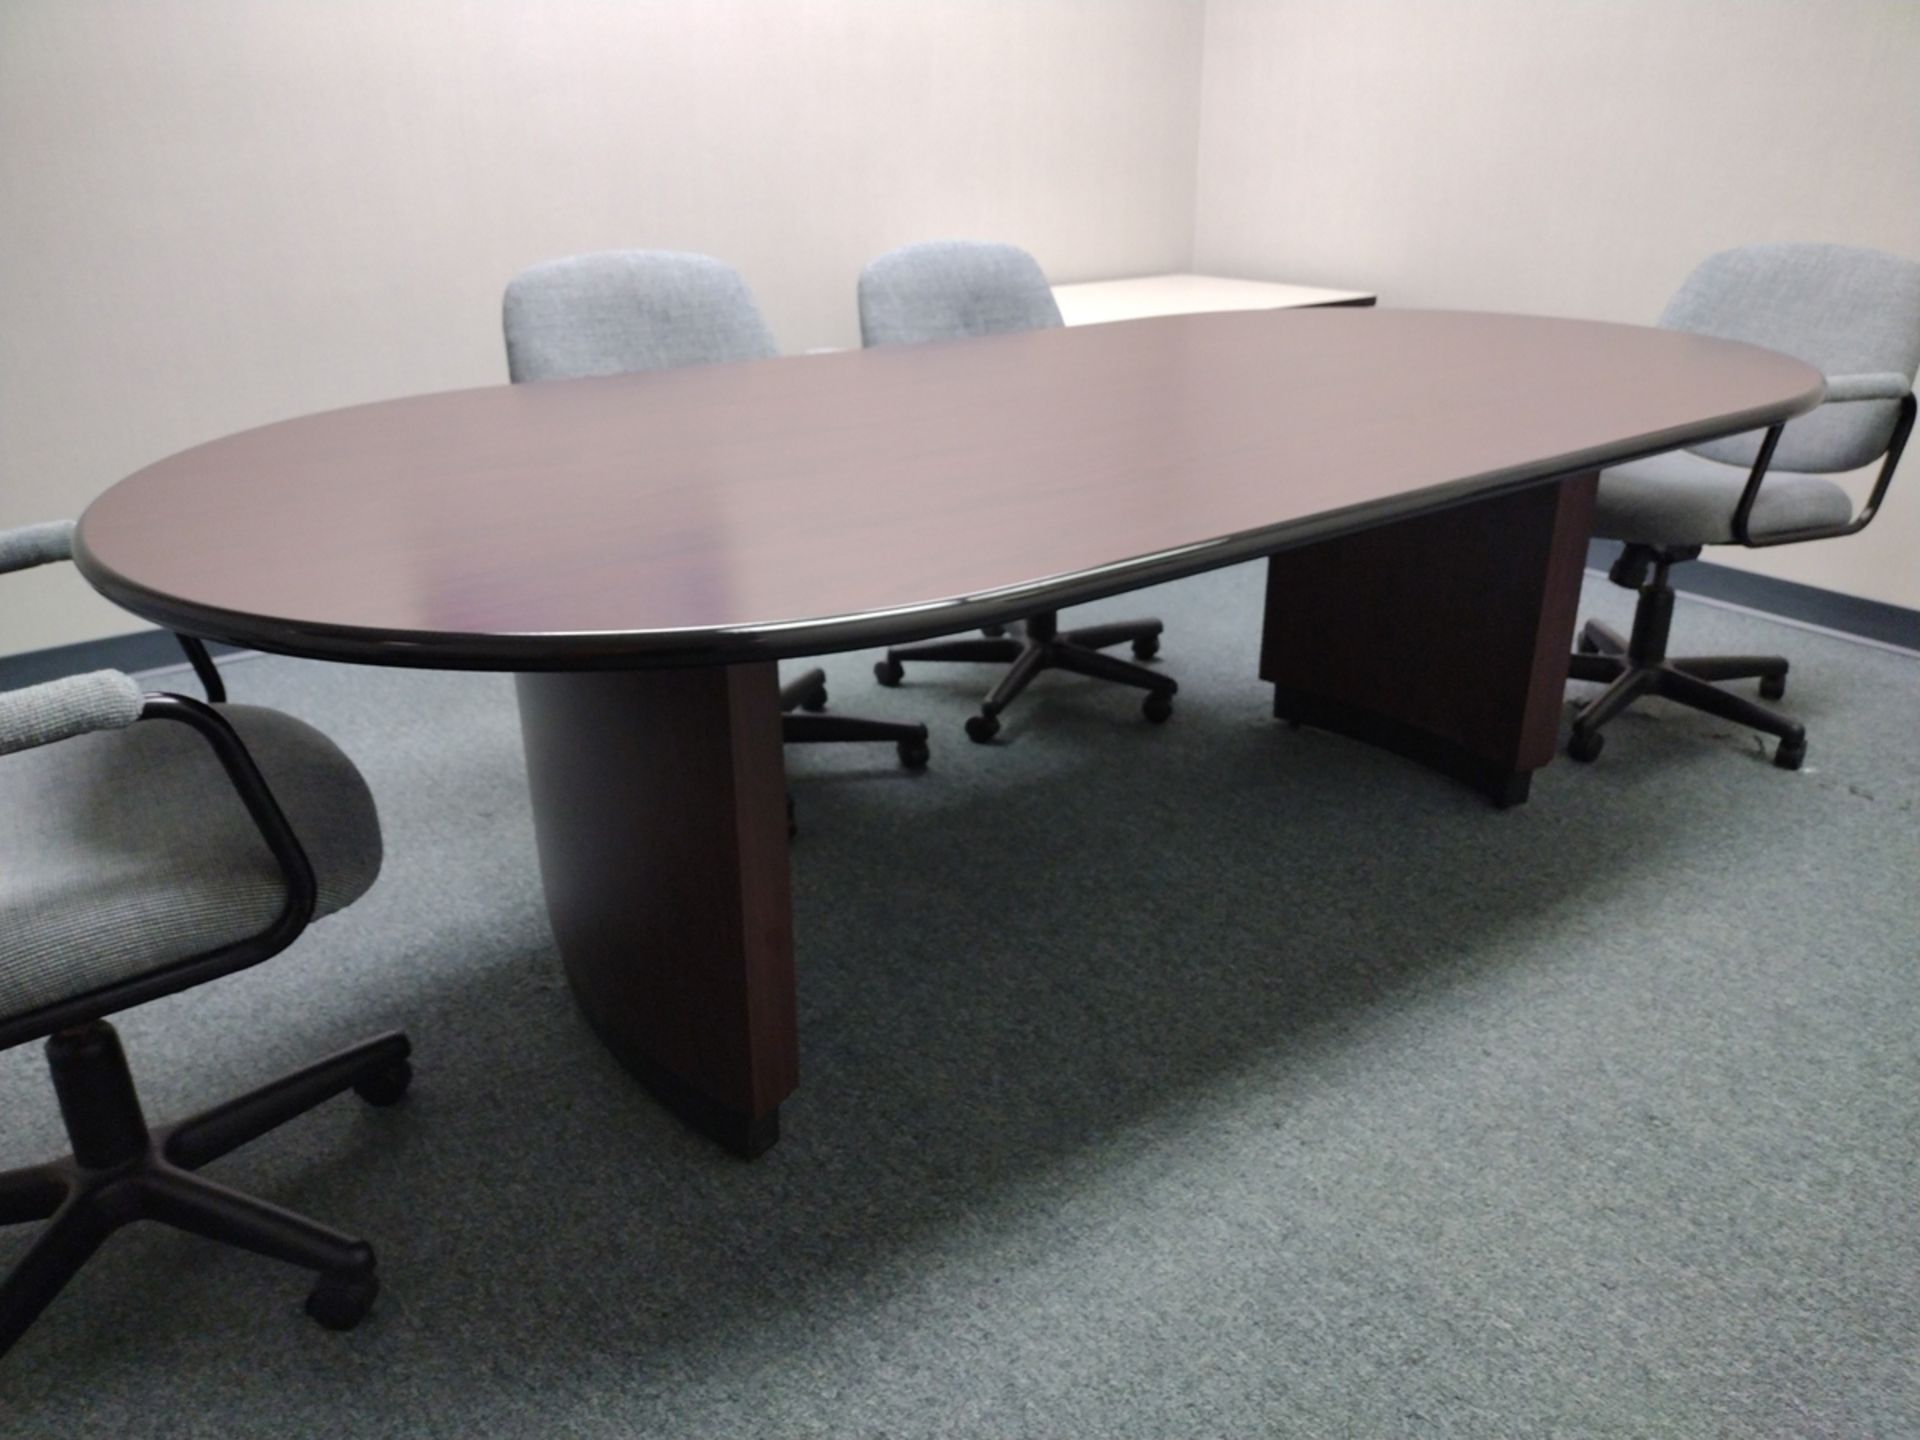 8ft Wood Laminate Conference Table w/ Chairs - Image 2 of 6